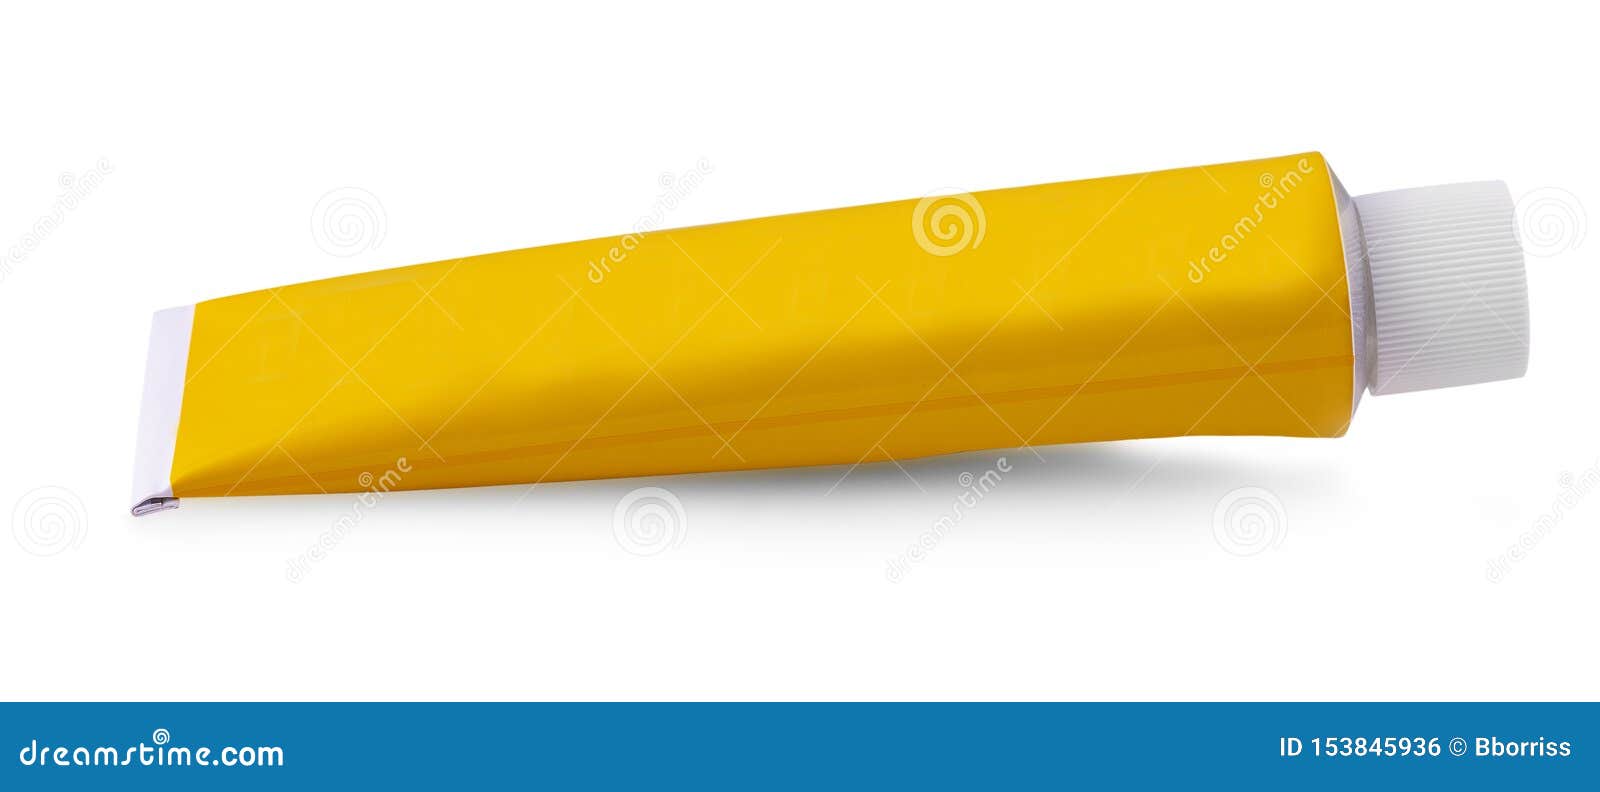 Download The Yellow Tube Mockup Template For Cosmetic Cream Or Gel, Isolated On White Background Stock ...